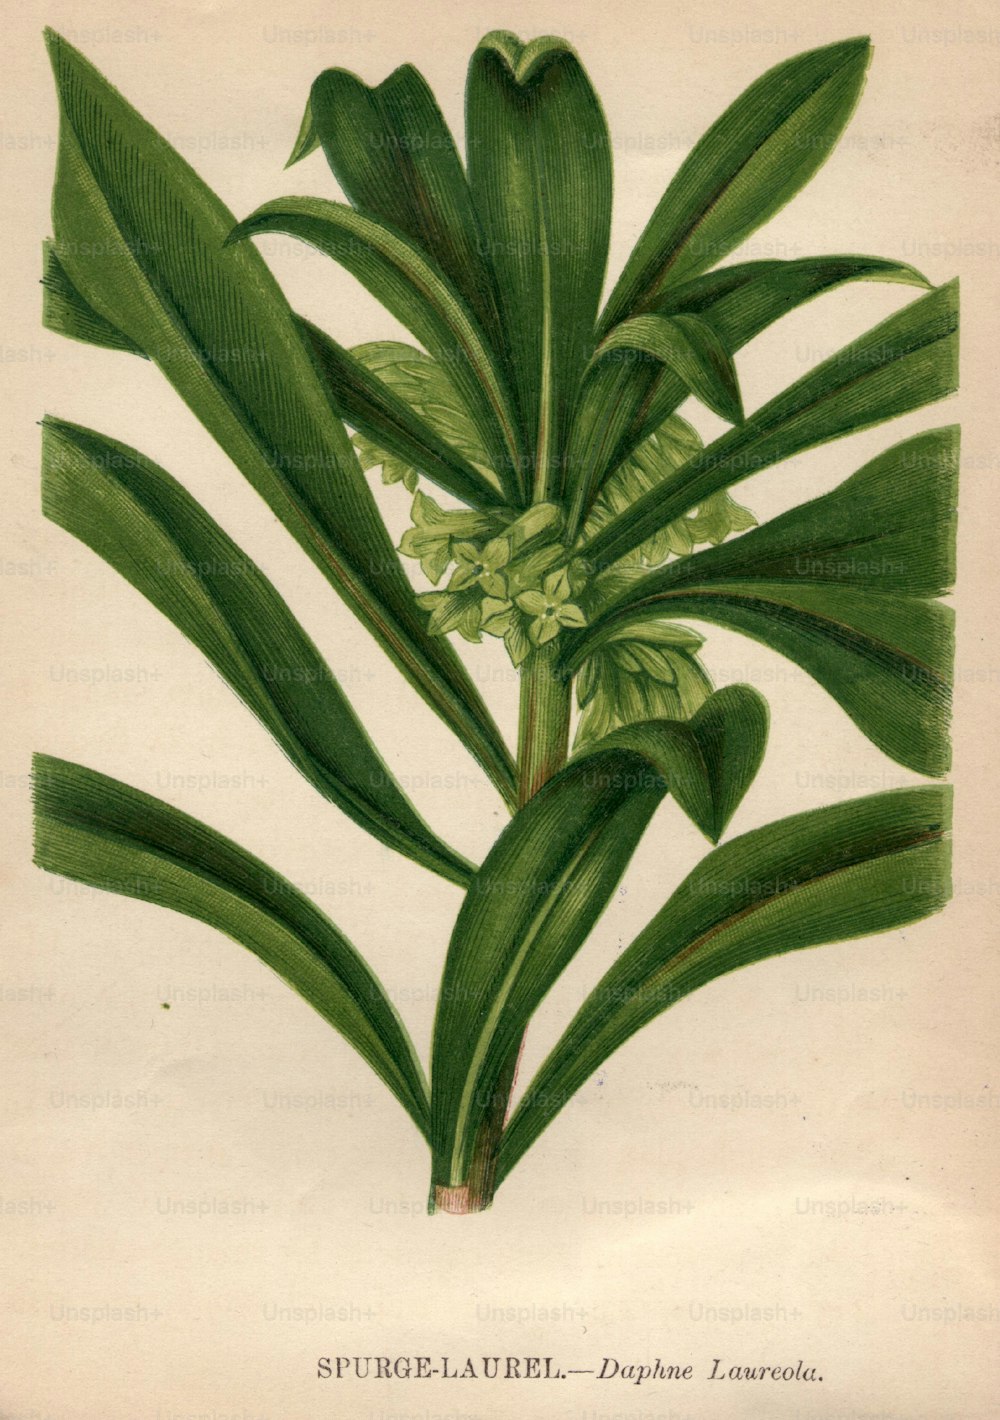 circa 1800:  Spurge laurel or daphne laureola.  (Photo by Hulton Archive/Getty Images)